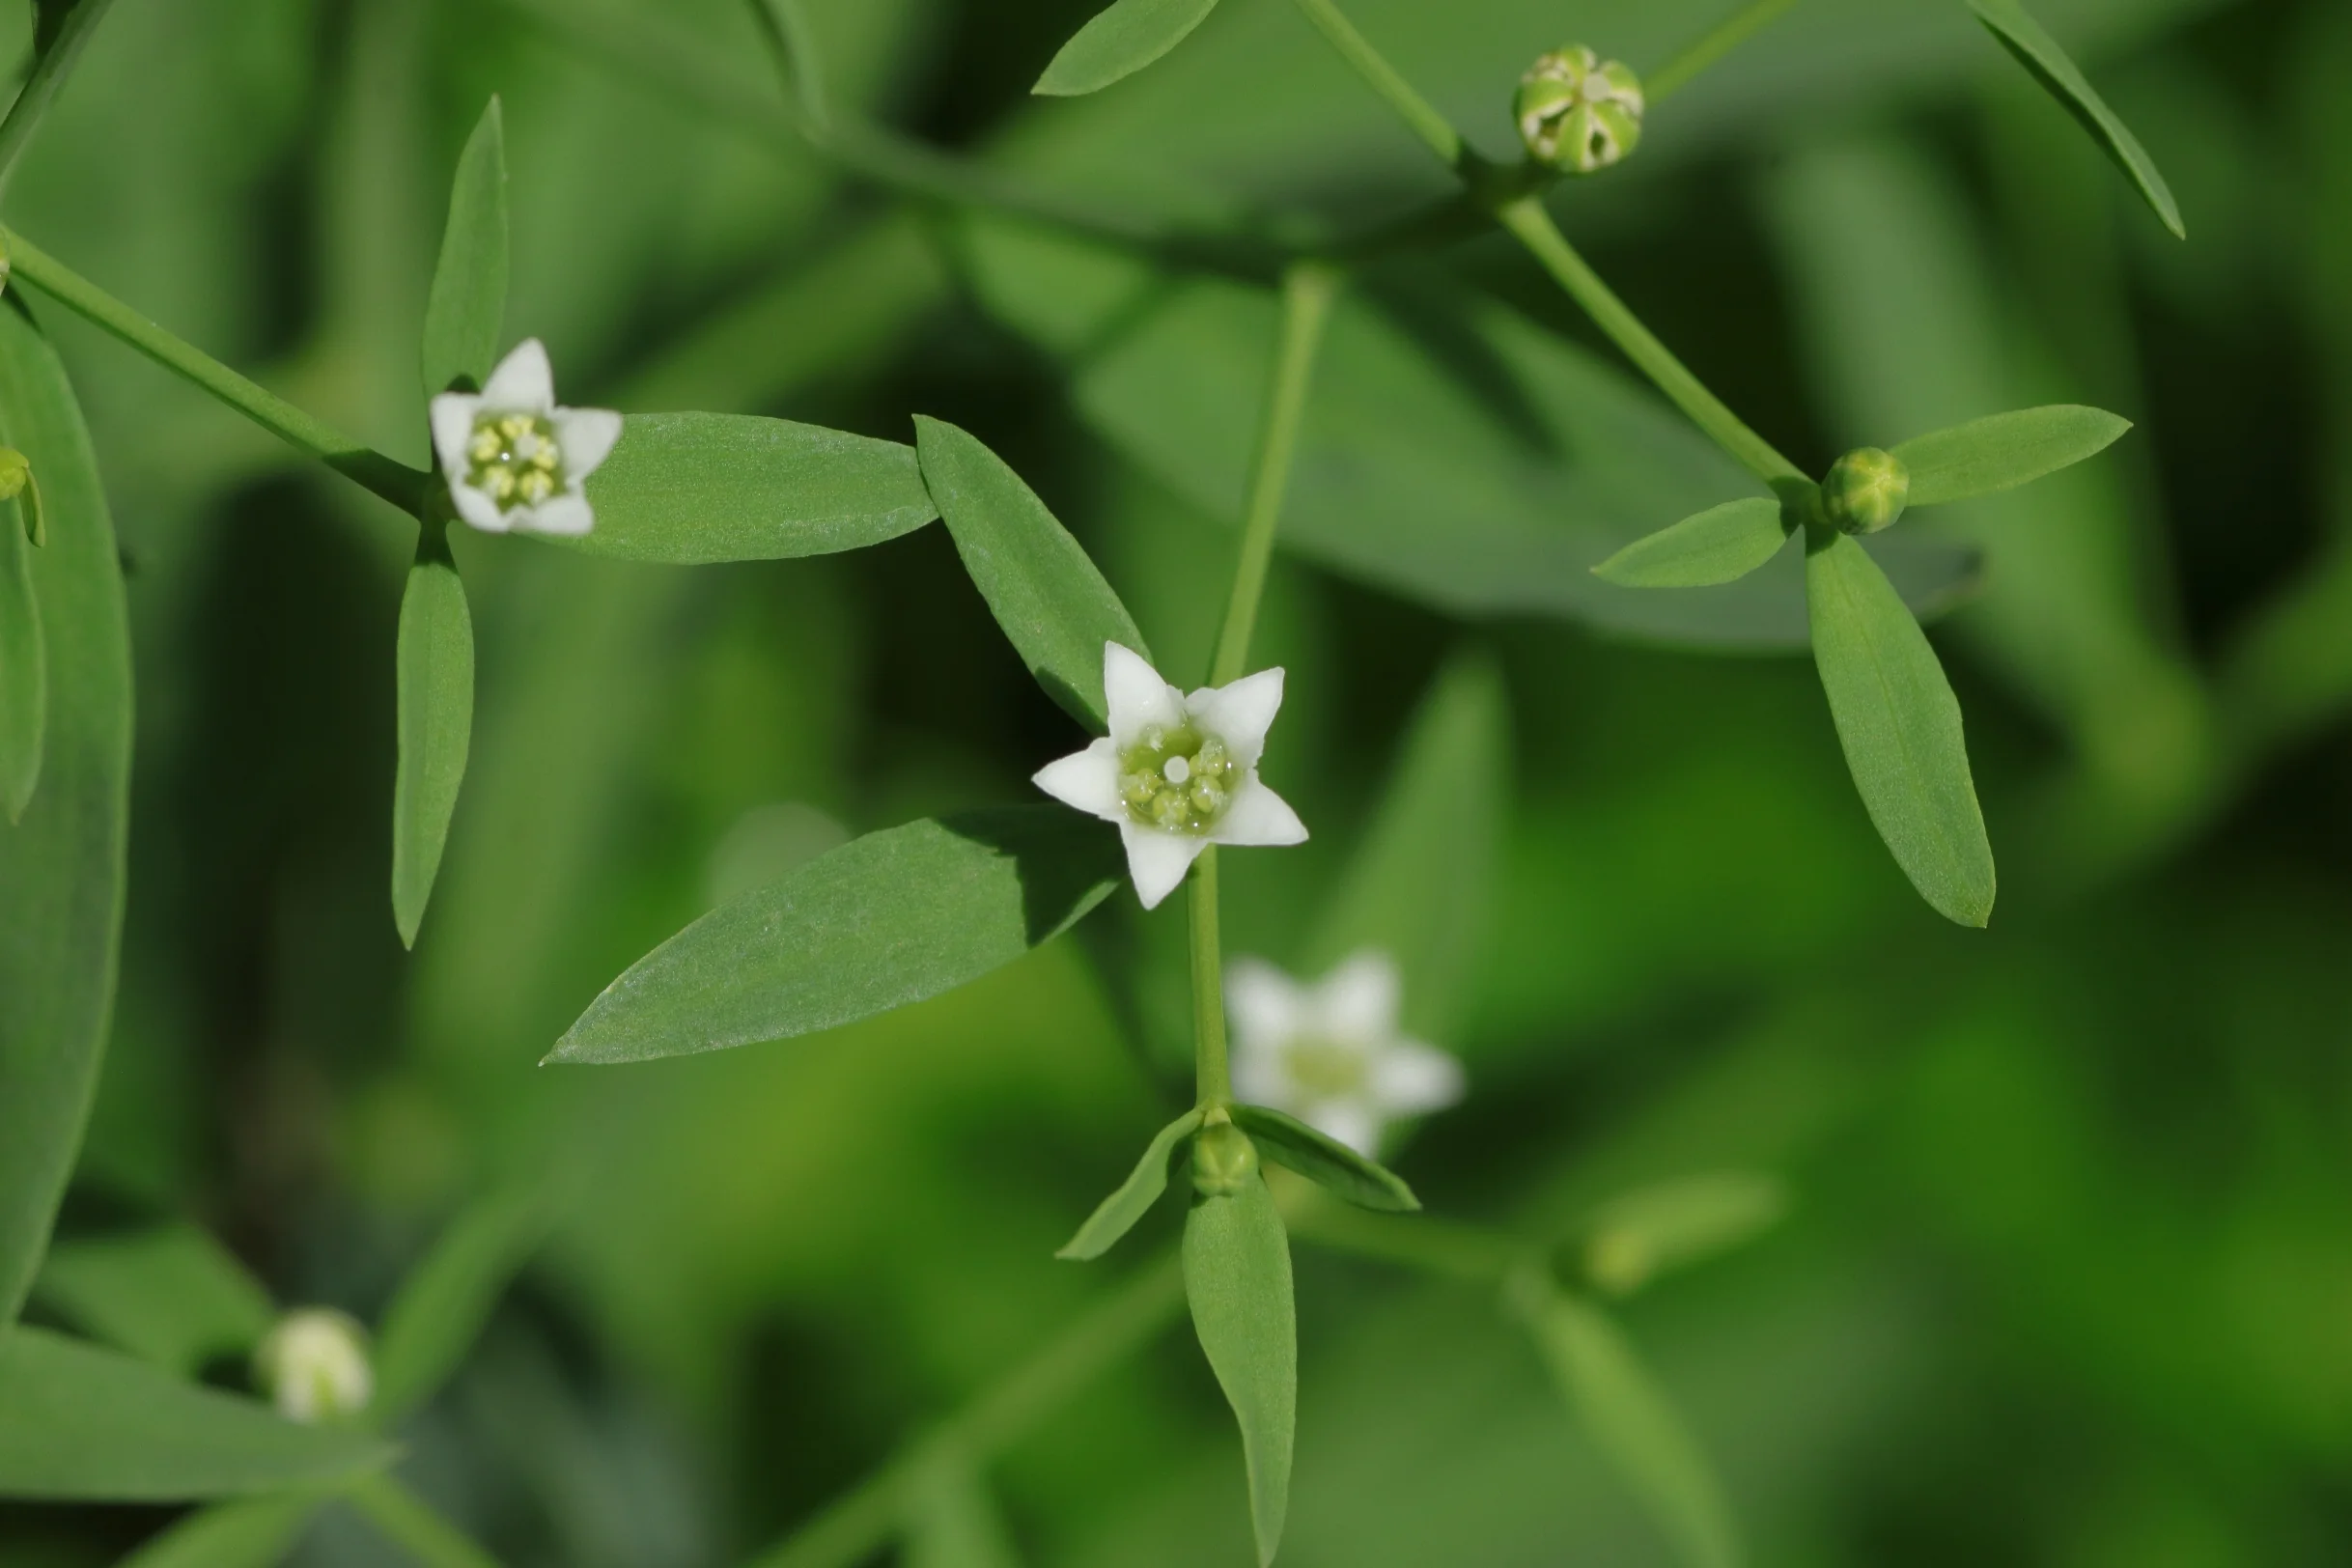 The bavarian bastard toadflax has white flowers with five petals arranged in a star shape. Two of the leaf are small and one of the leaf is larger.